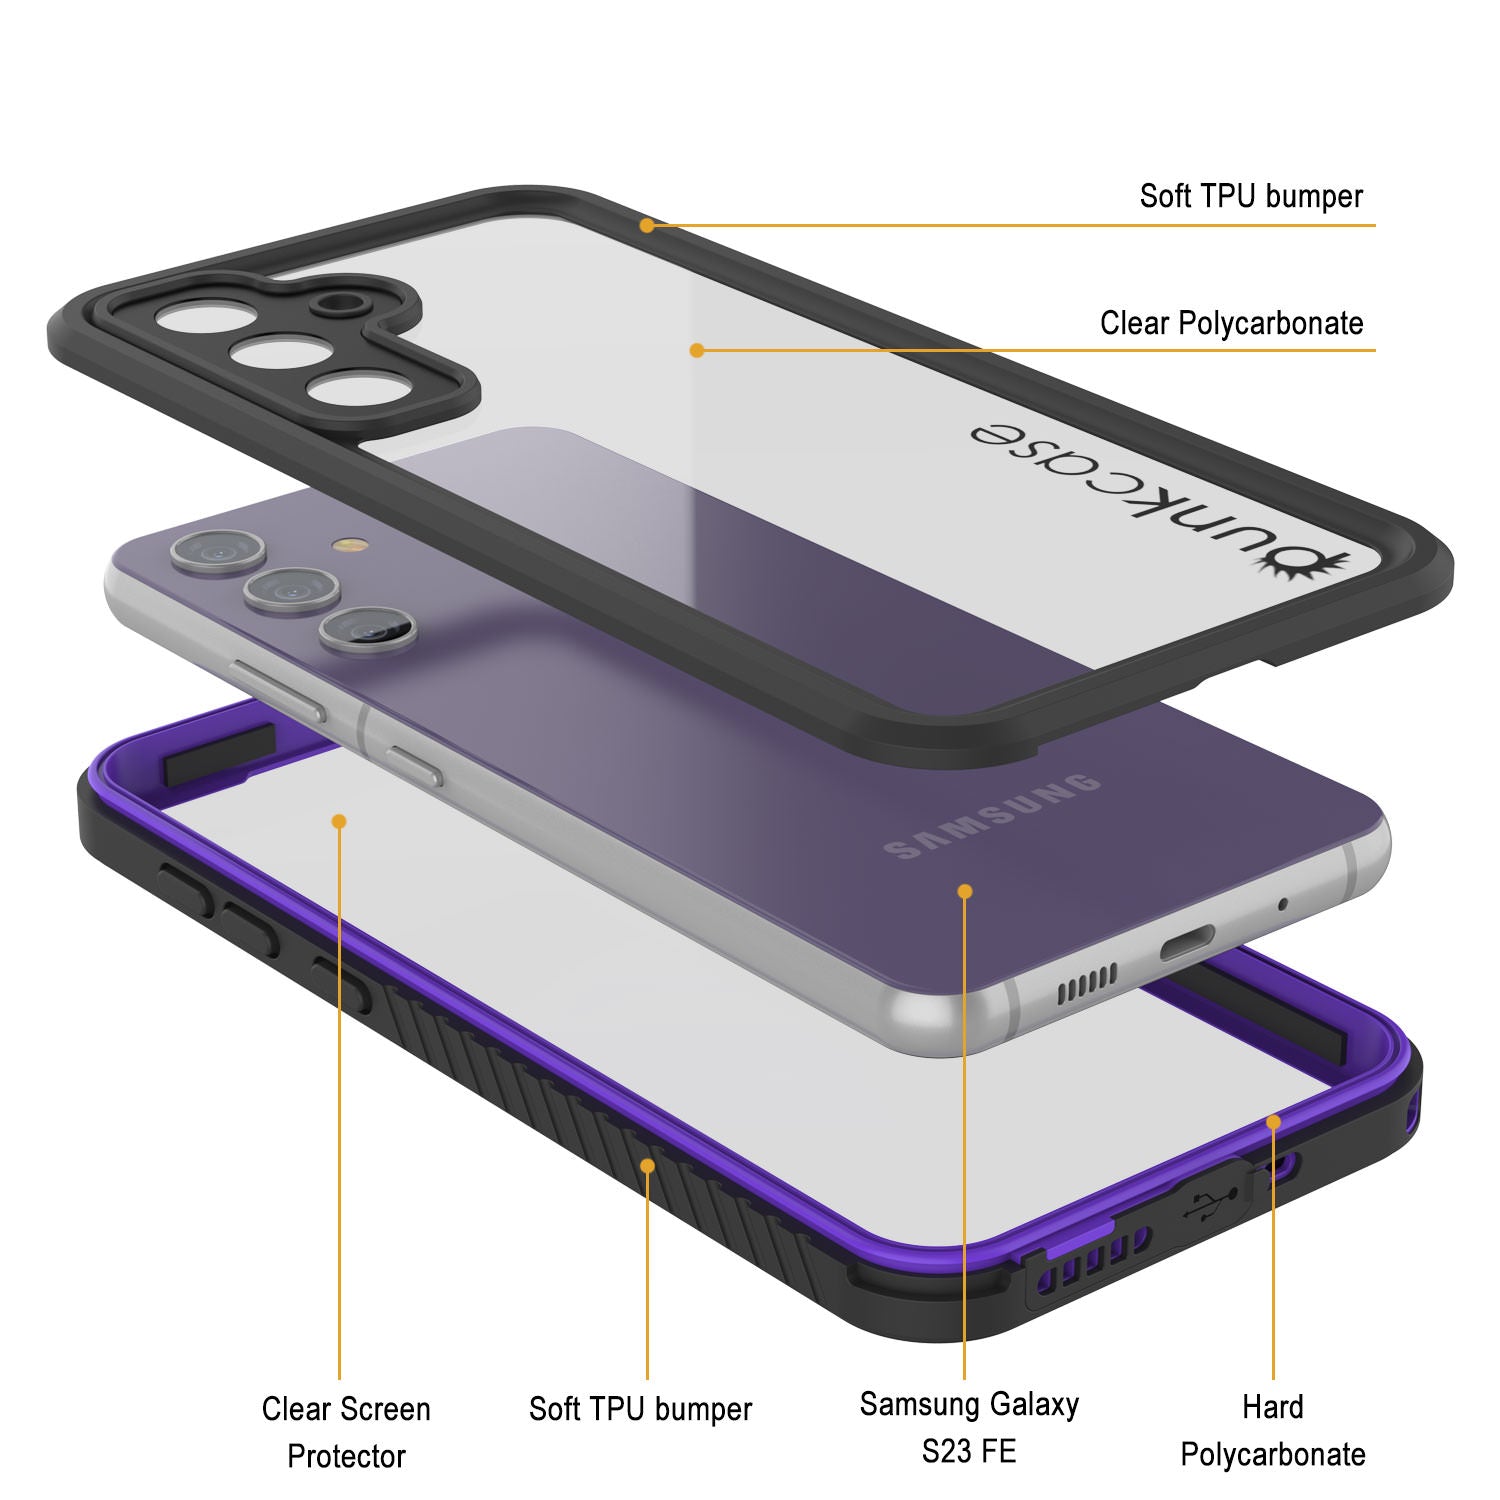 Galaxy S23 FE Water/ Shockproof [Extreme Series] Slim Screen Protector Case [Purple]